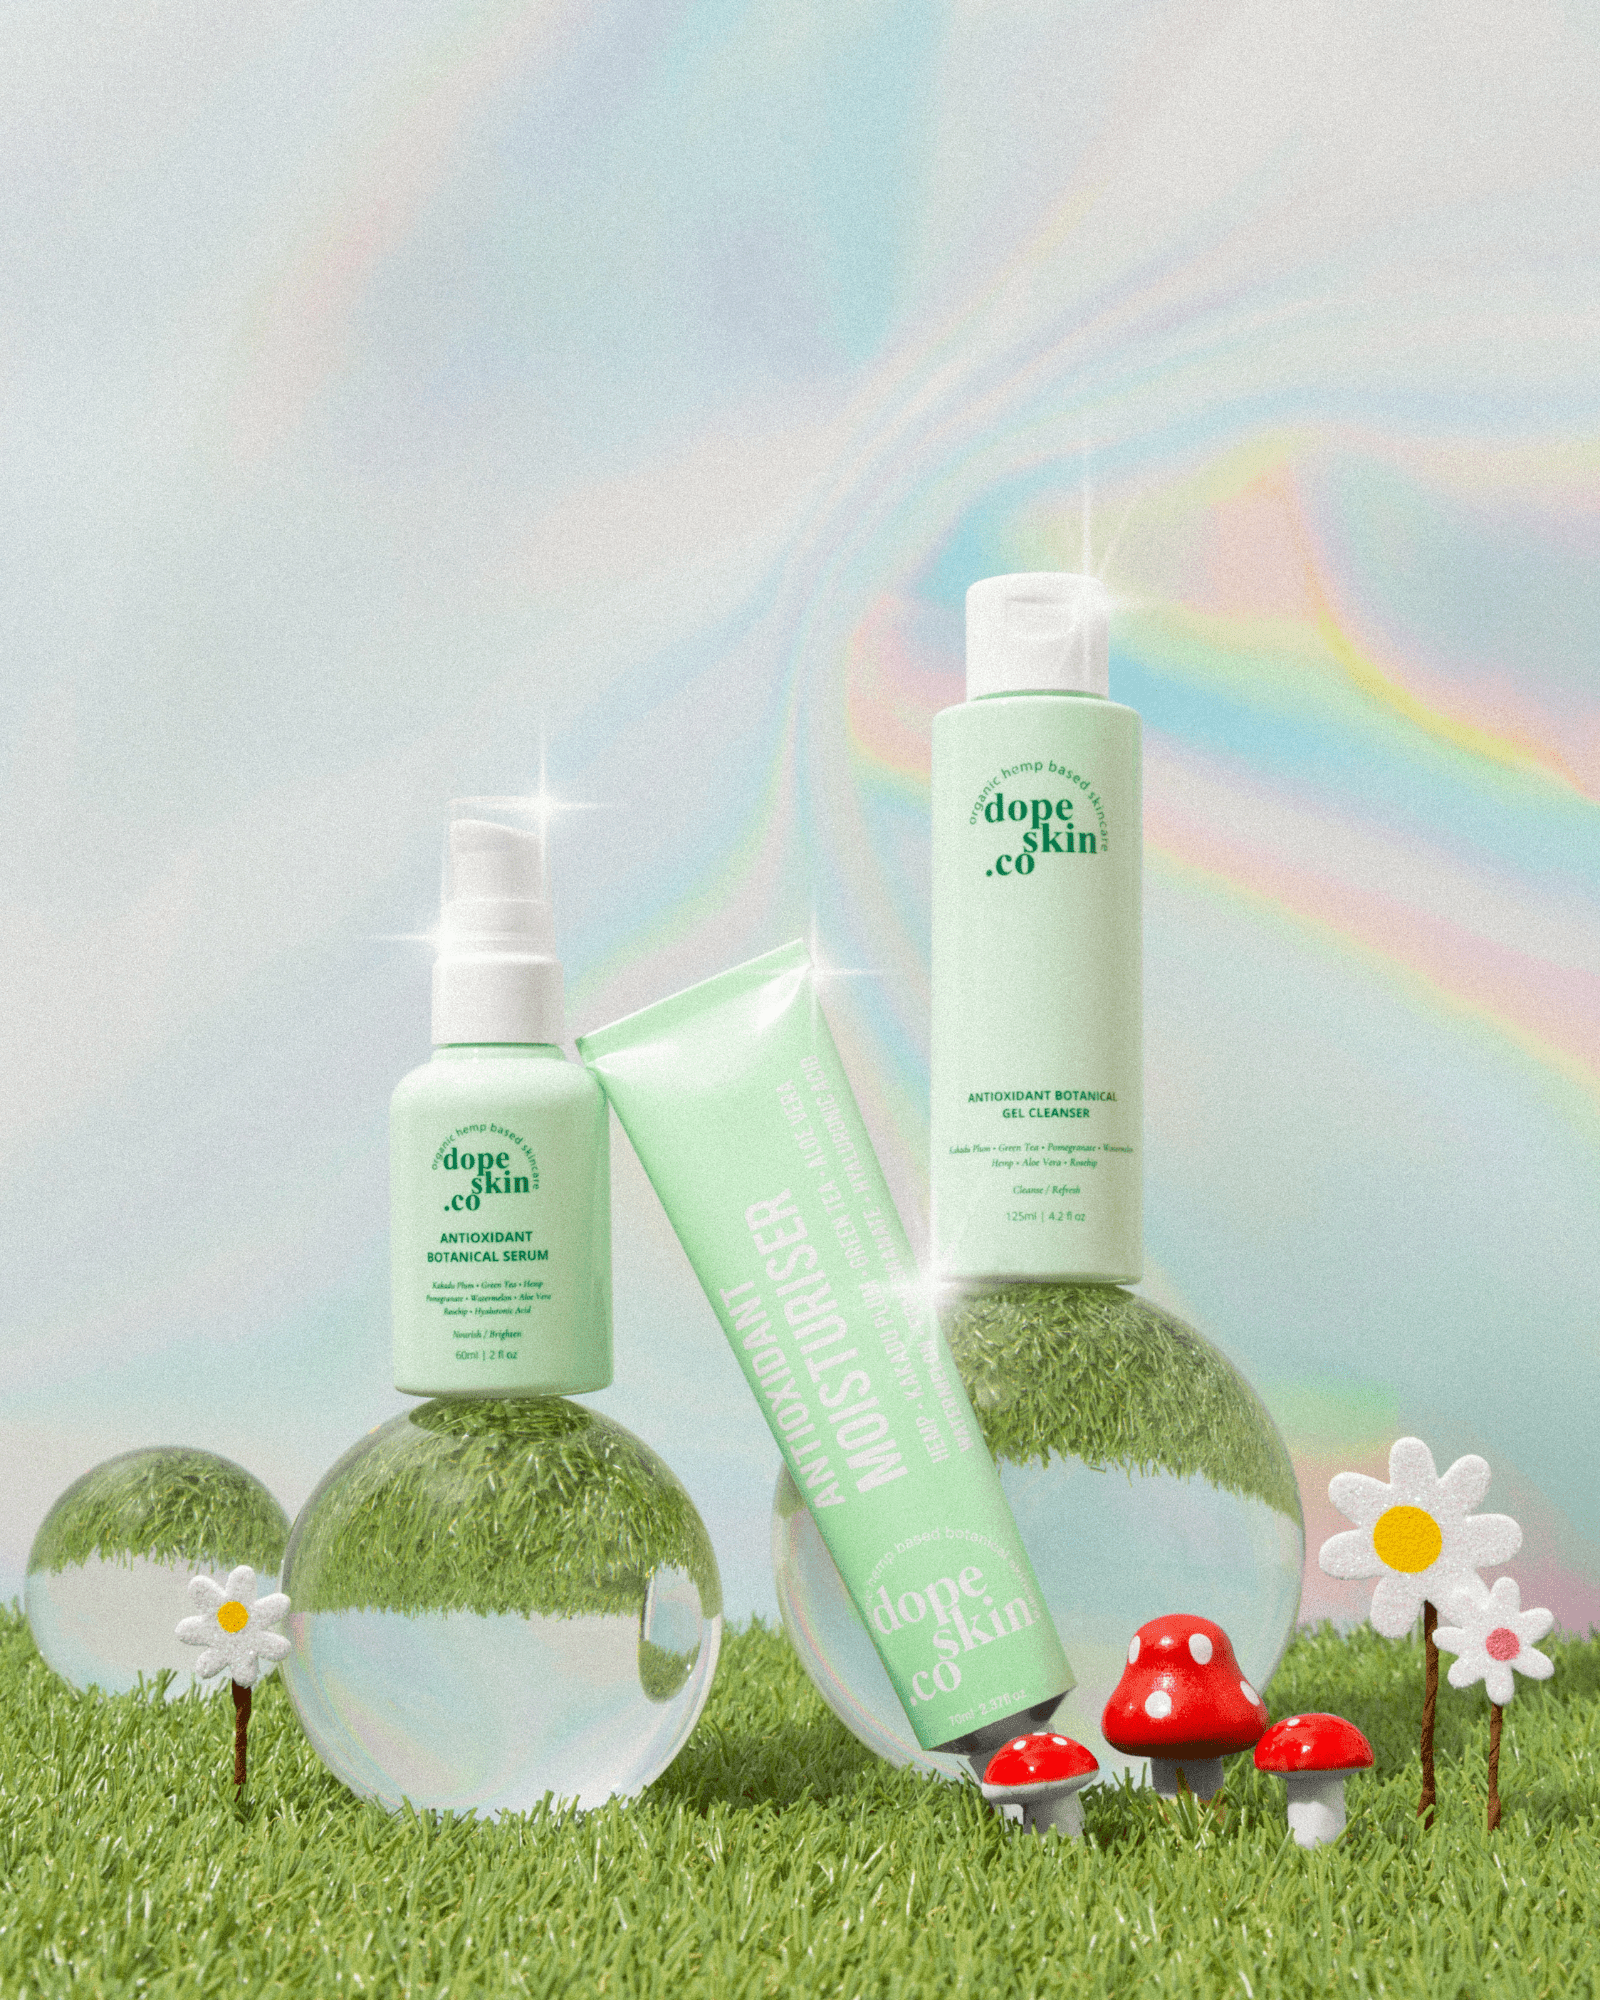 Three Dope Skin skincare products displayed on grass with glass spheres, mushrooms, and flowers in the background